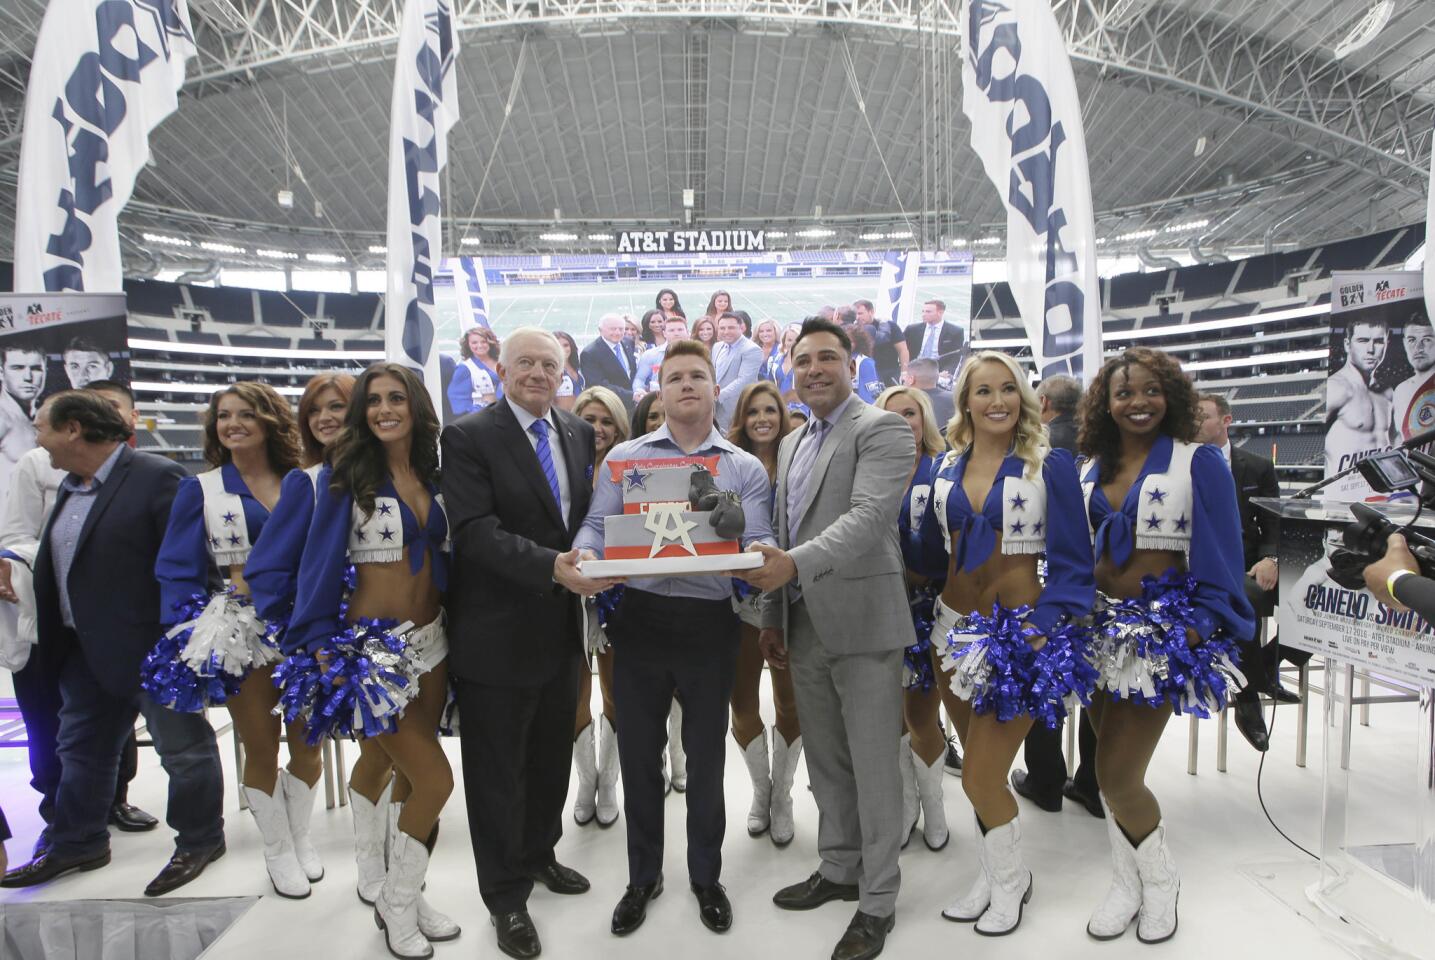 Canelo Alvarez, center, poses with a birthday cake presented to him by Dallas Cowboys owner Jerry Jones, left, and Oscar De La Hoya during a news conference promoting a fight between Alvarez and Liam Smith in Arlington, Texas, Monday, July 18, 2016. Alvarez and Smith will fight for the BBO Junior Middleweight Championship on Saturday, Sept. 17, 2016. (AP Photo/LM Otero)